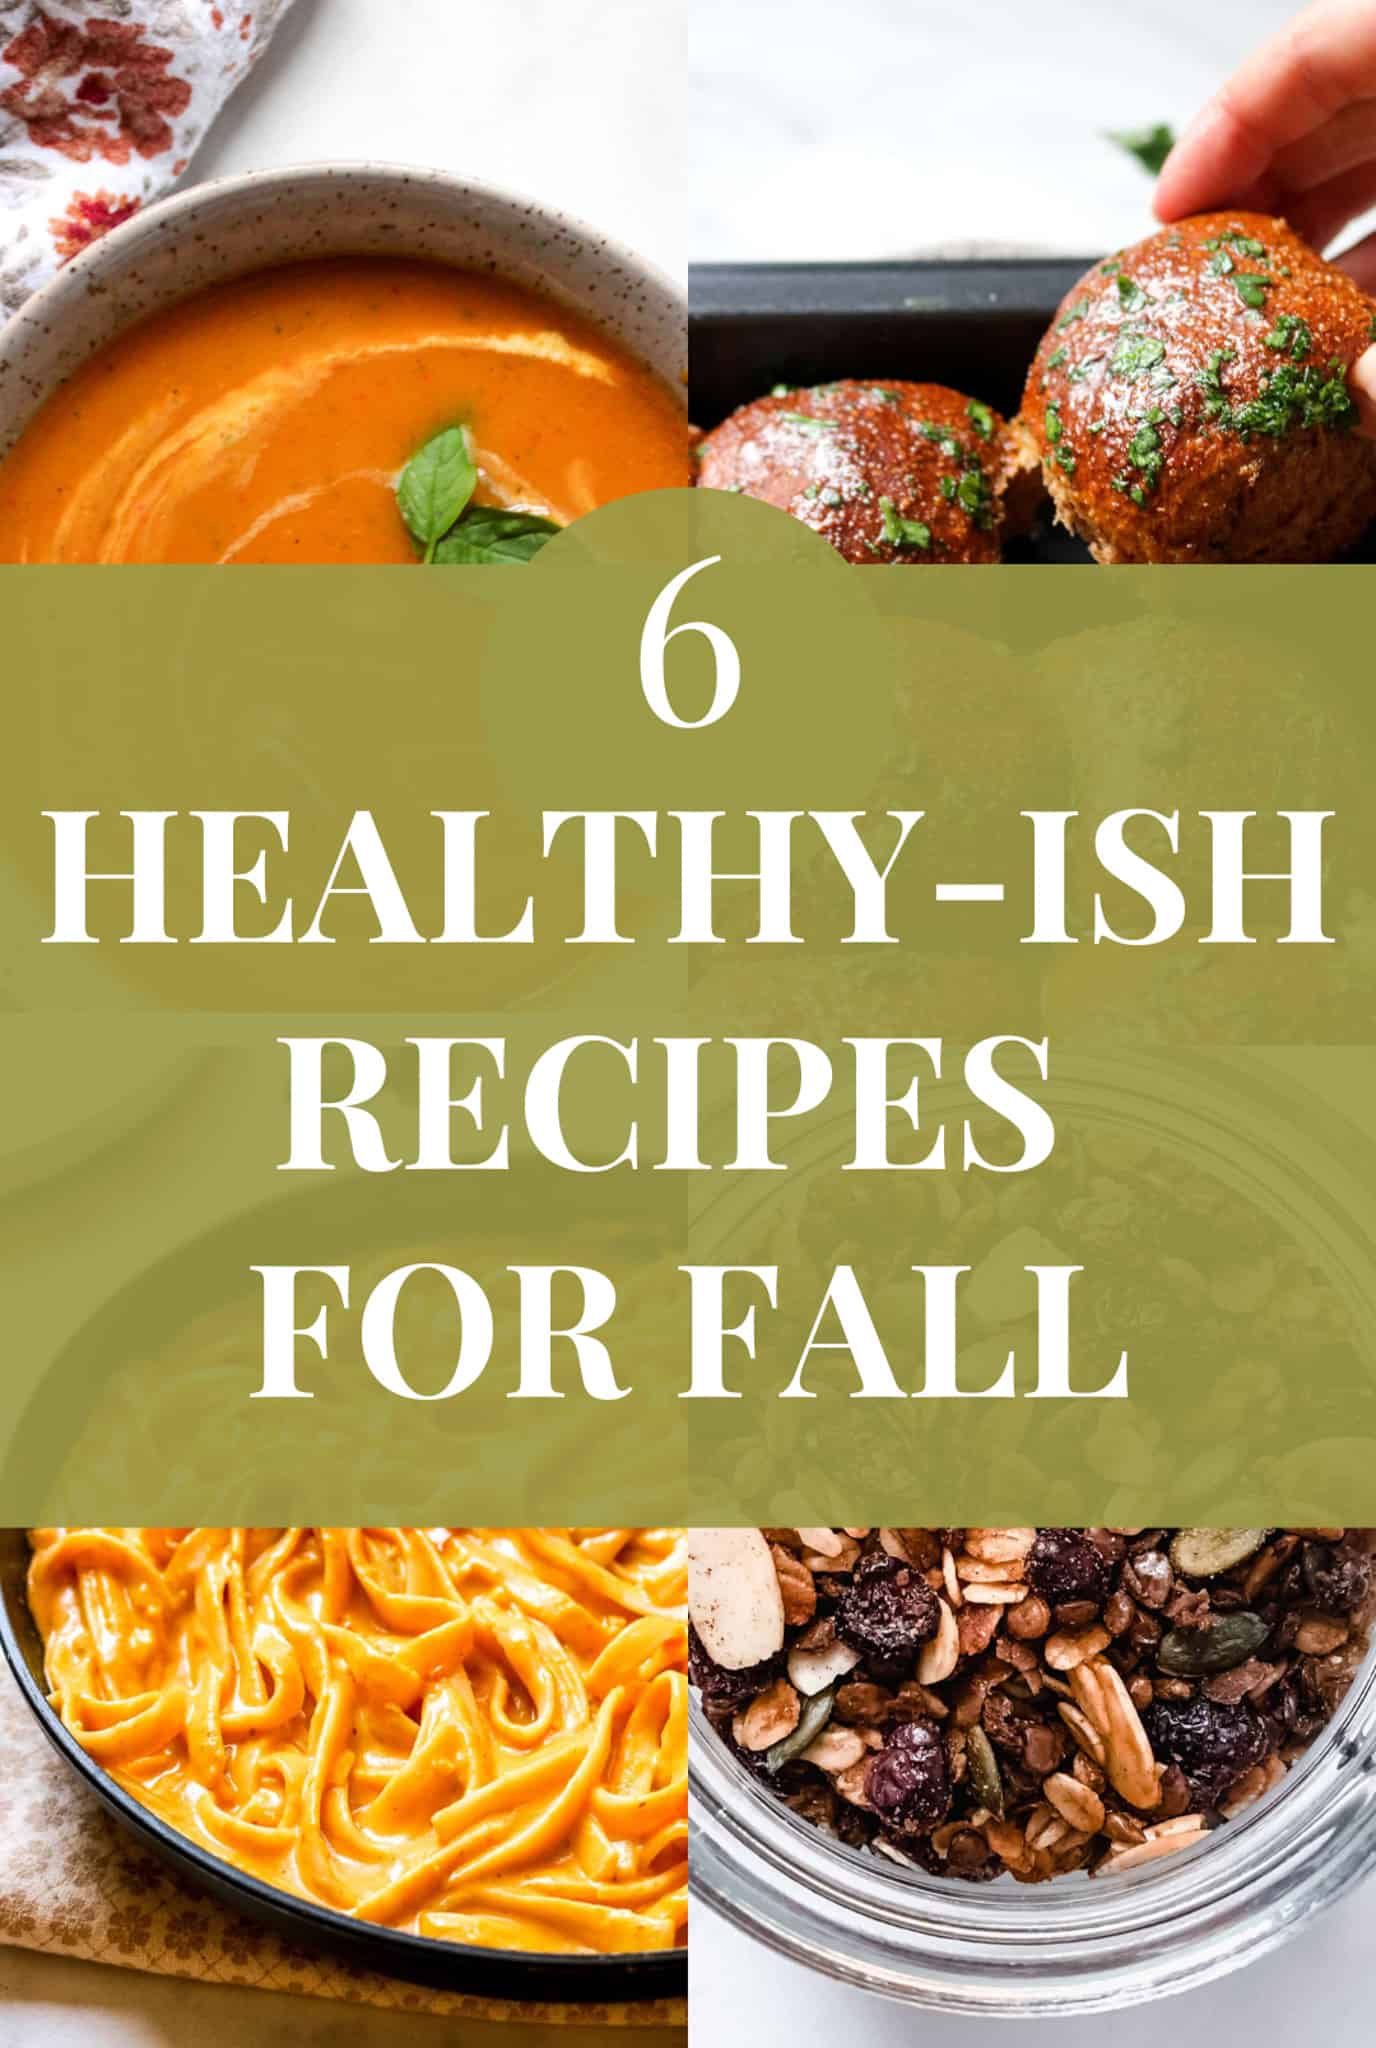 a collage of 4 fall recipes with a green box overlay of the title "6 Healthy-Ish Recipes for Fall"